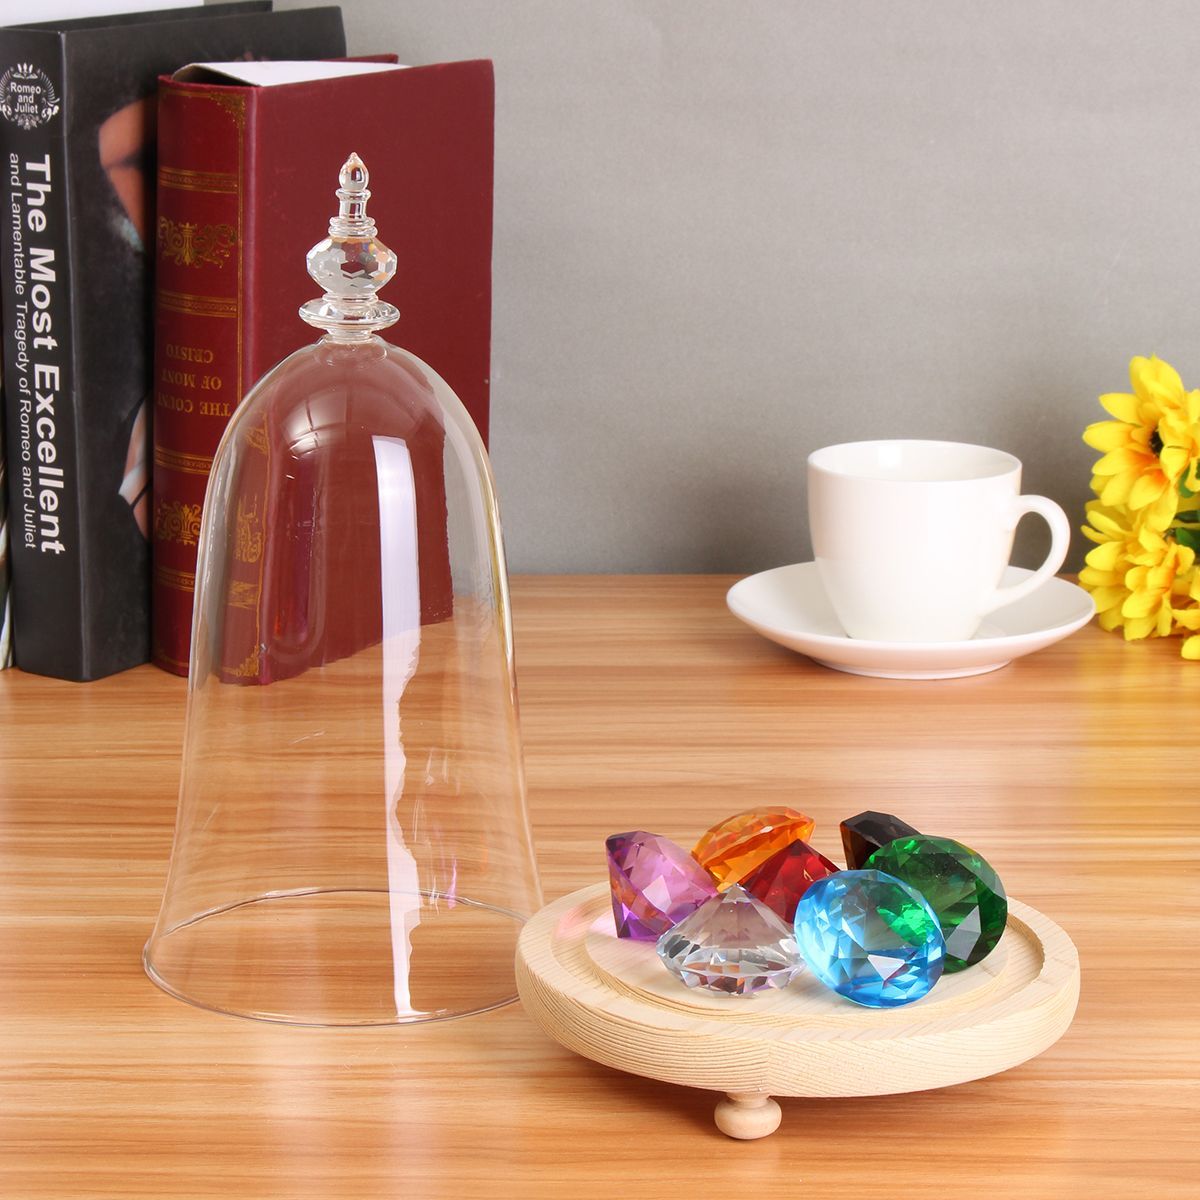 Glass-Display-Dome-Cloche-Box-with-Wooden-Base-Inspired-By-Beauty-and-the-Beast-1477536